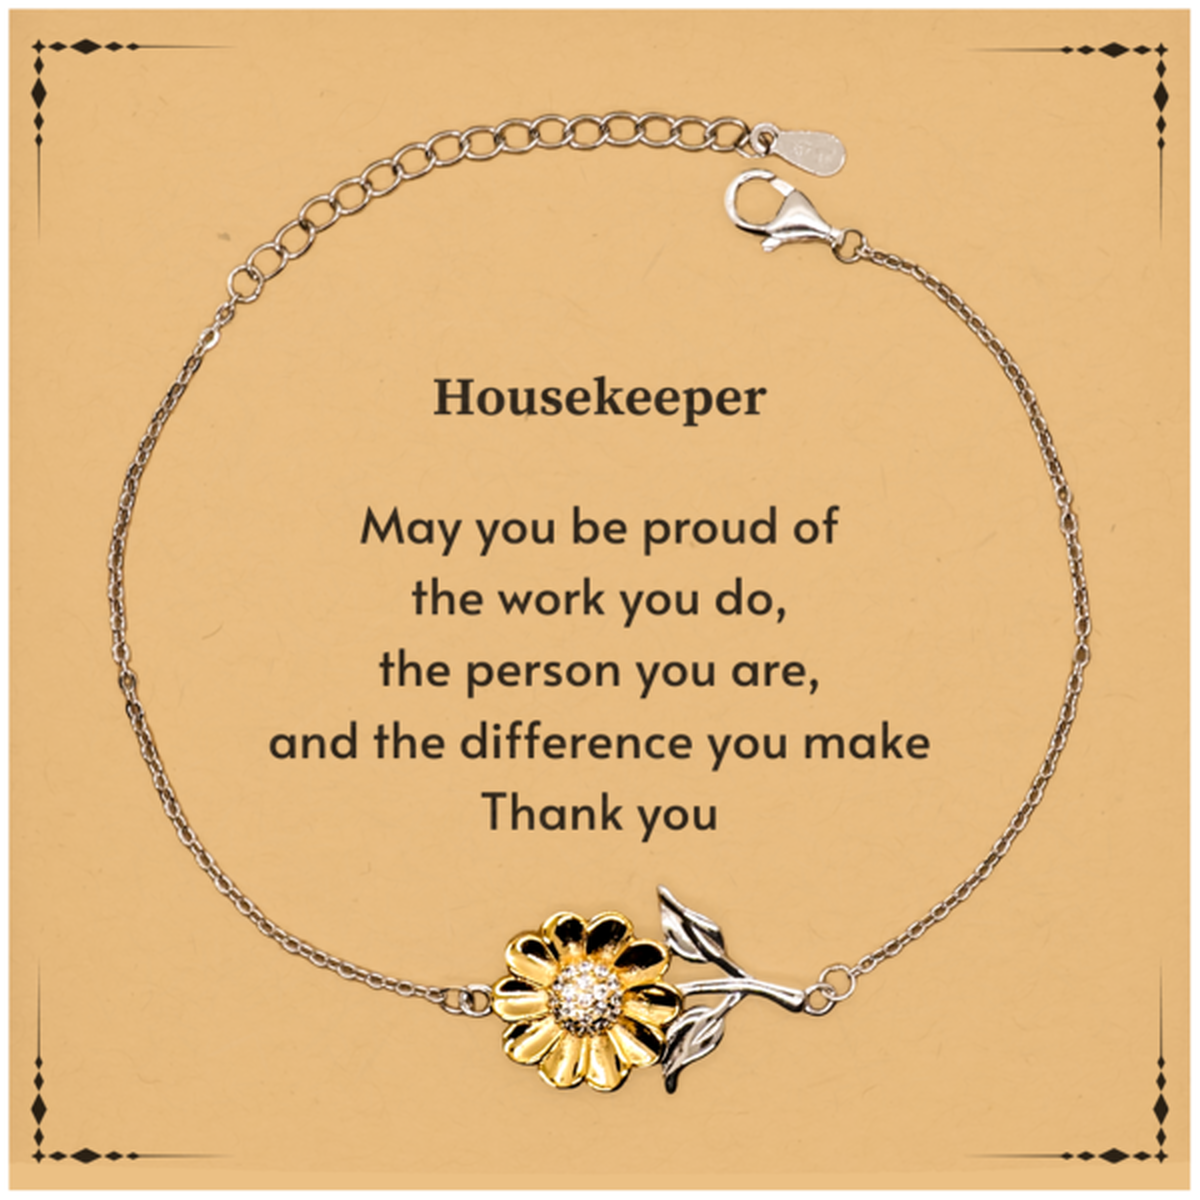 Heartwarming Sunflower Bracelet Retirement Coworkers Gifts for Housekeeper, Housekeeper May You be proud of the work you do, the person you are Gifts for Boss Men Women Friends